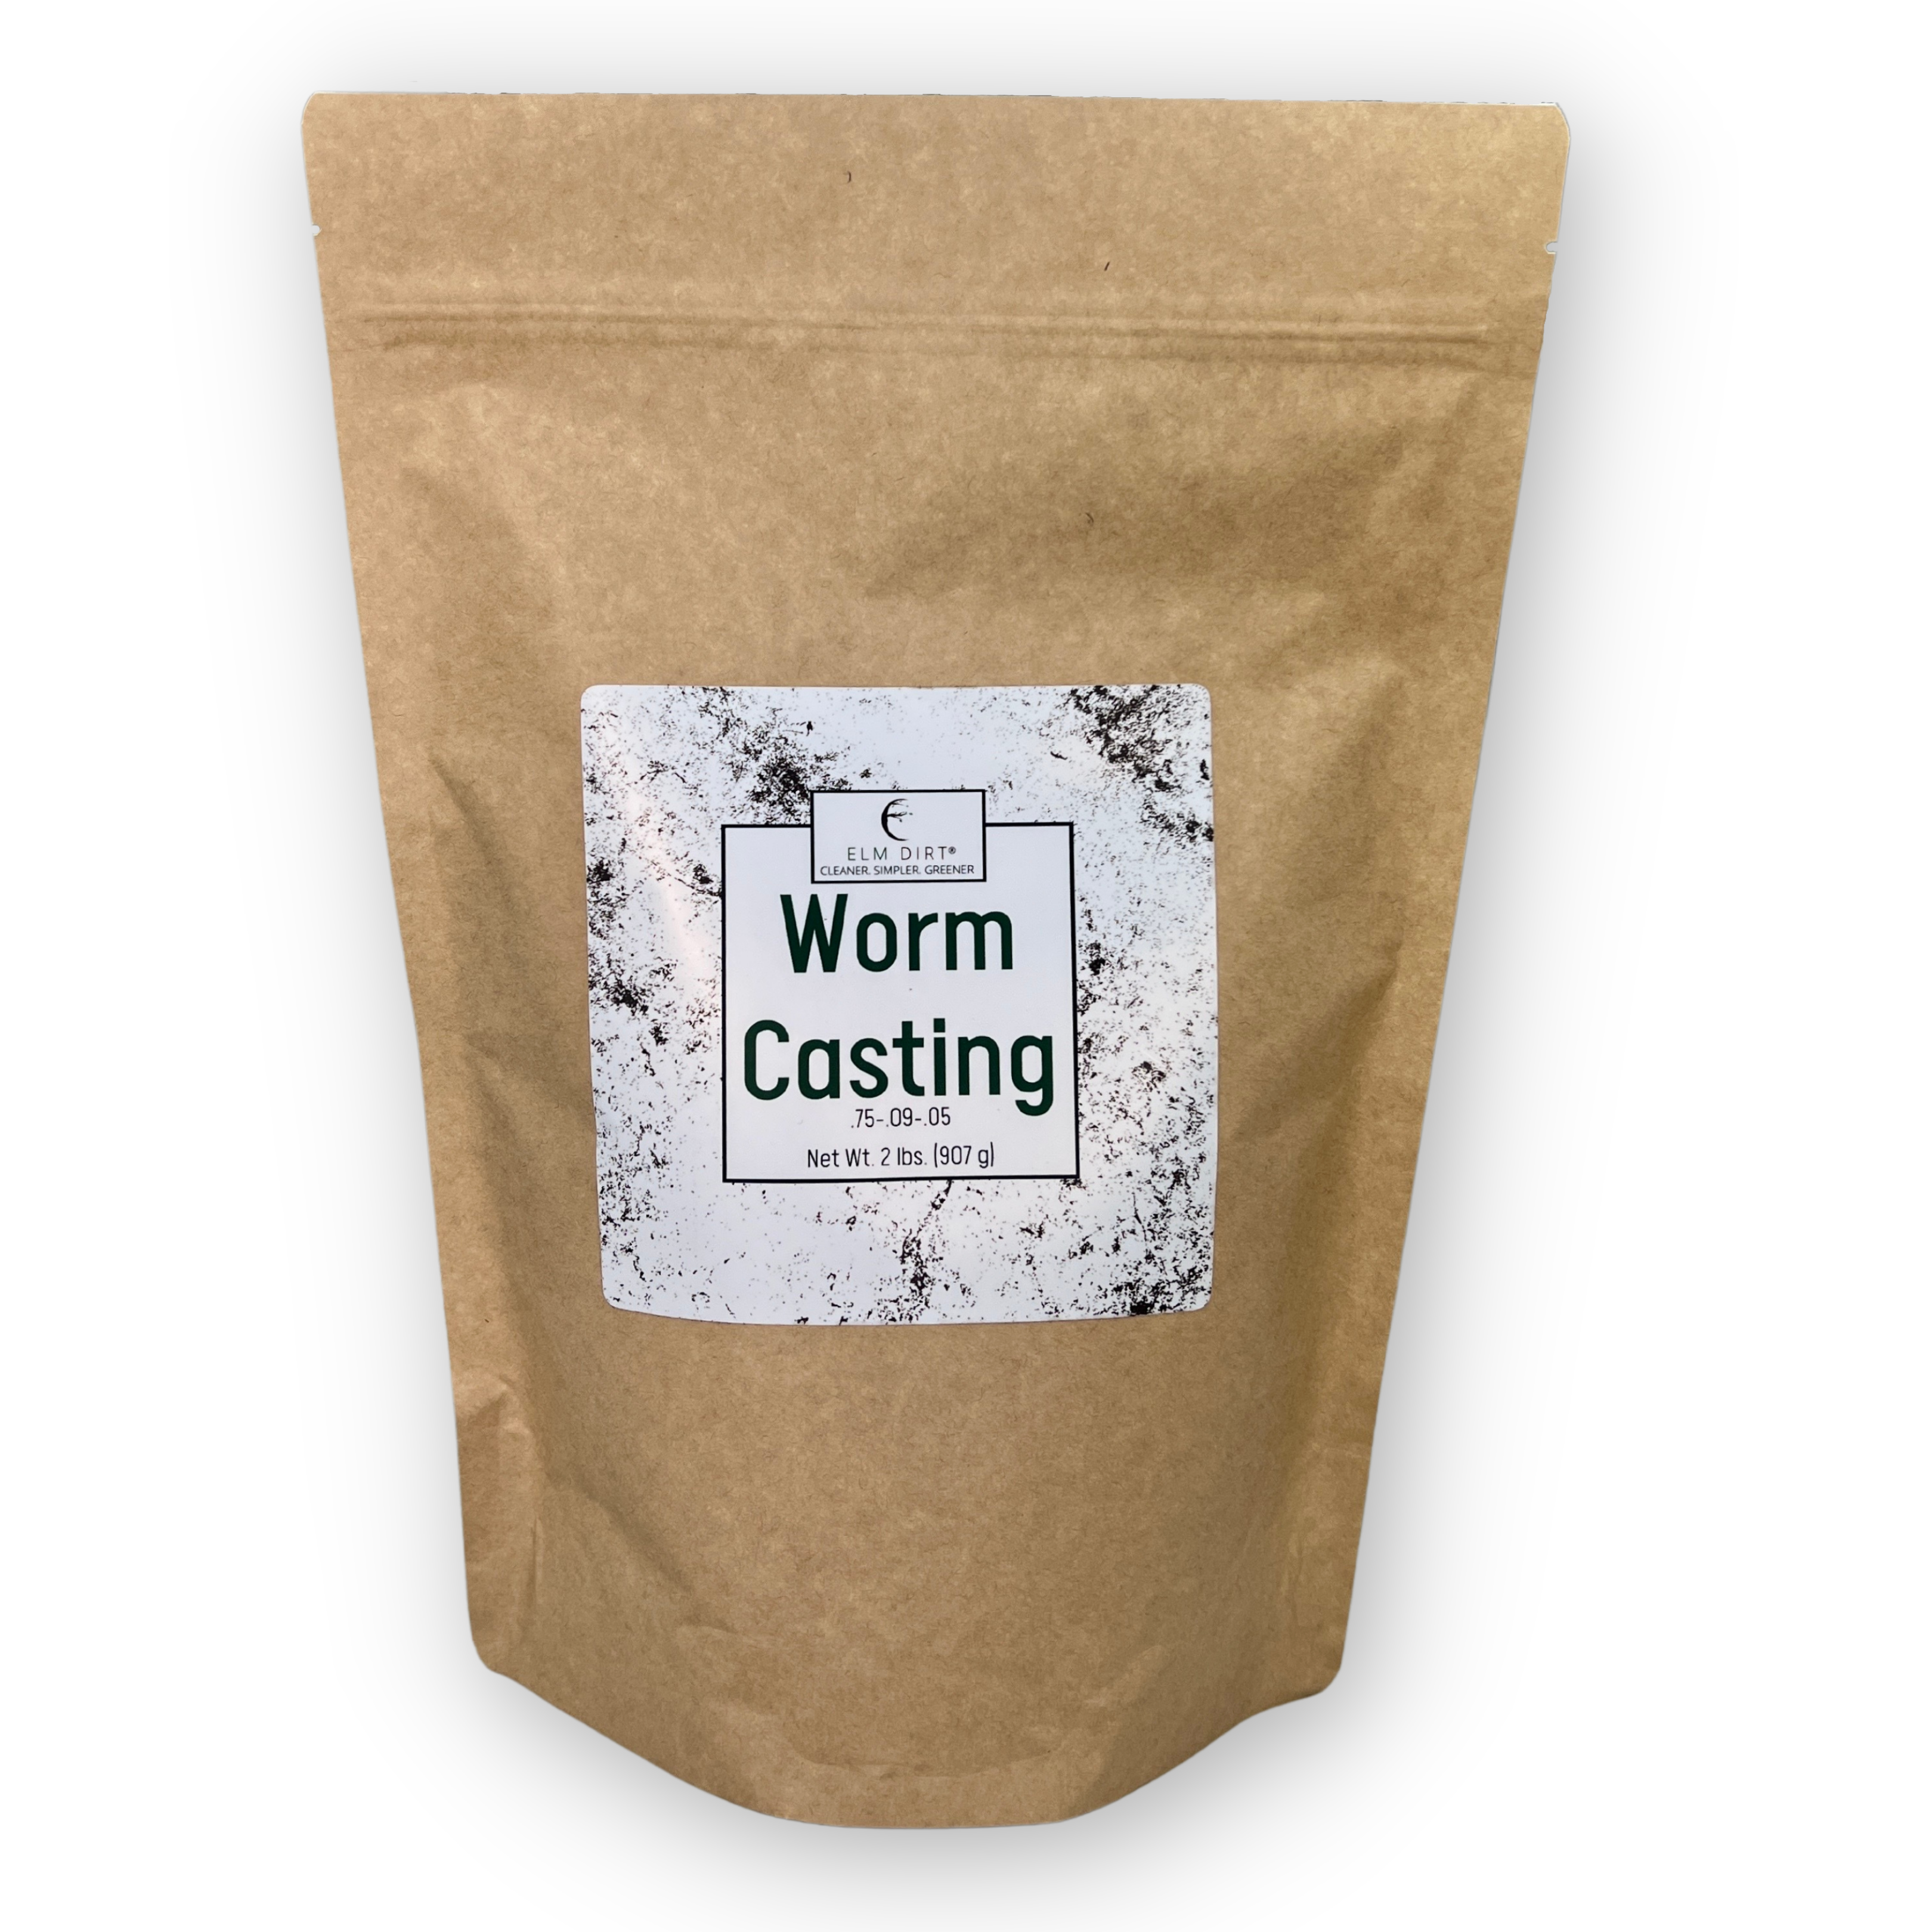 Elm Dirt Premium Worm Castings! Boost garden growth & health naturally. Organic, nutrient-rich fertilizer with beneficial microbes. Chemical-free, eco-friendly. Shop now!